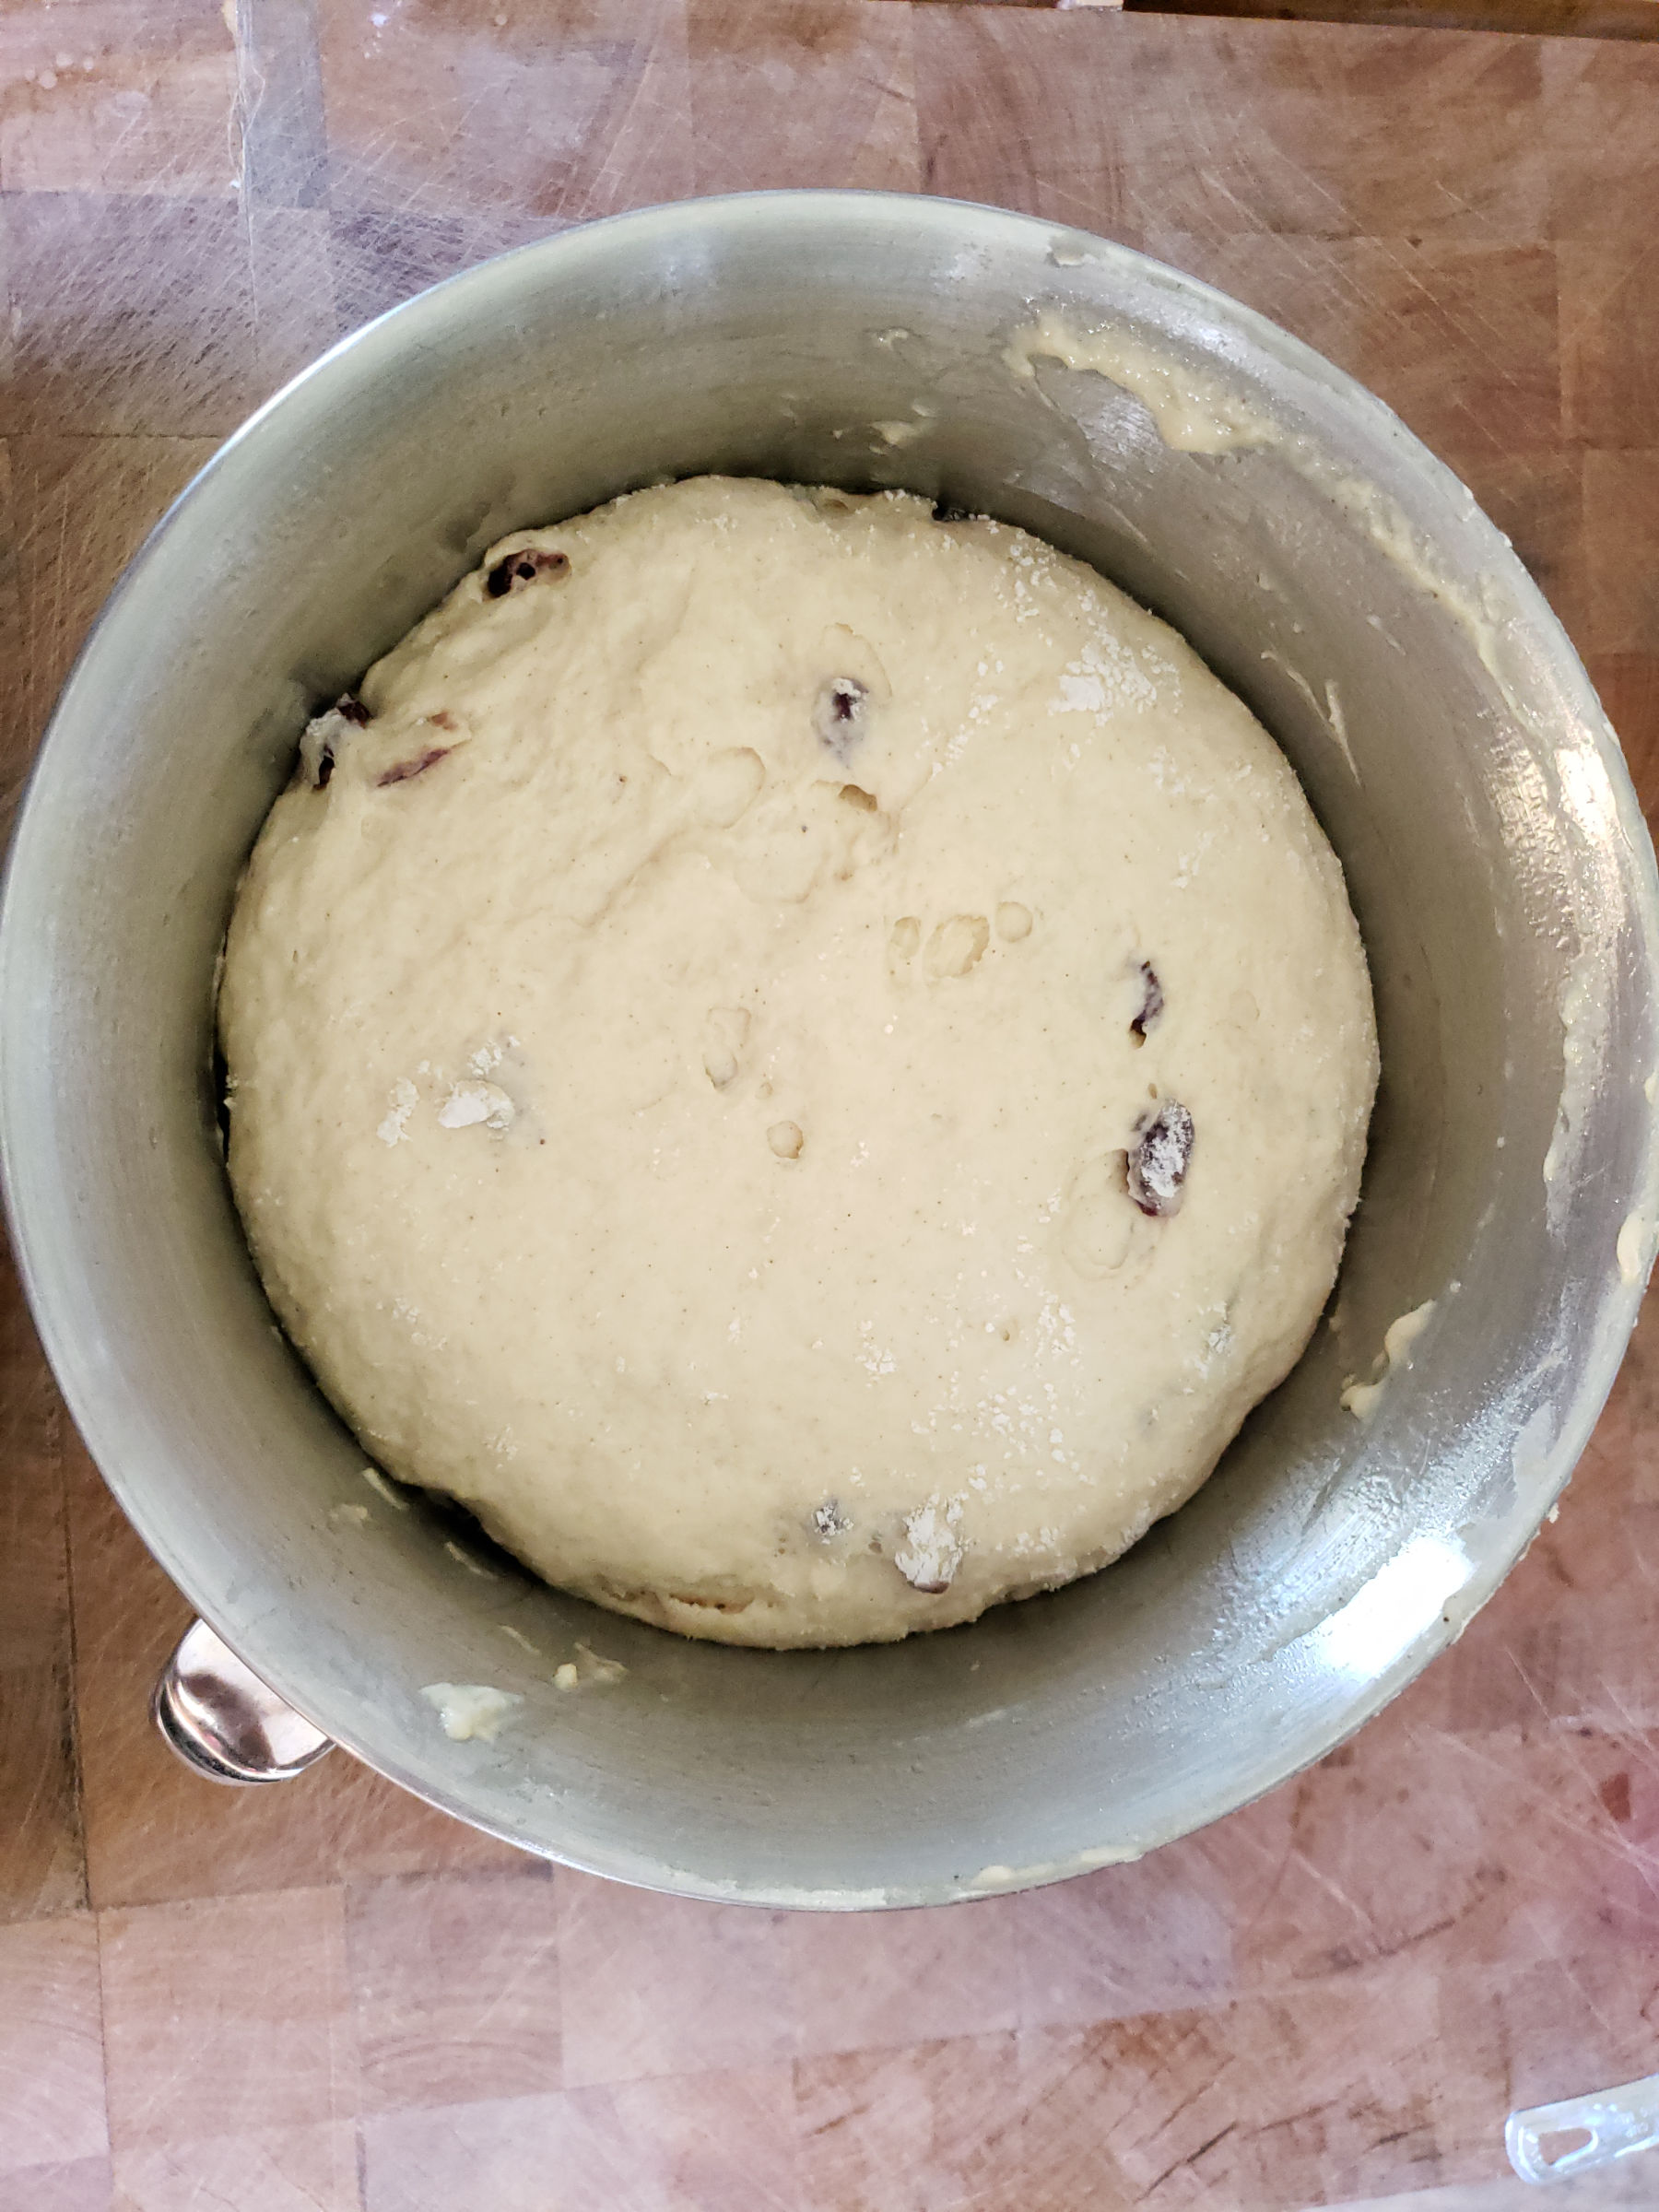 Cross buns dough risen and ready to shape into rounds.